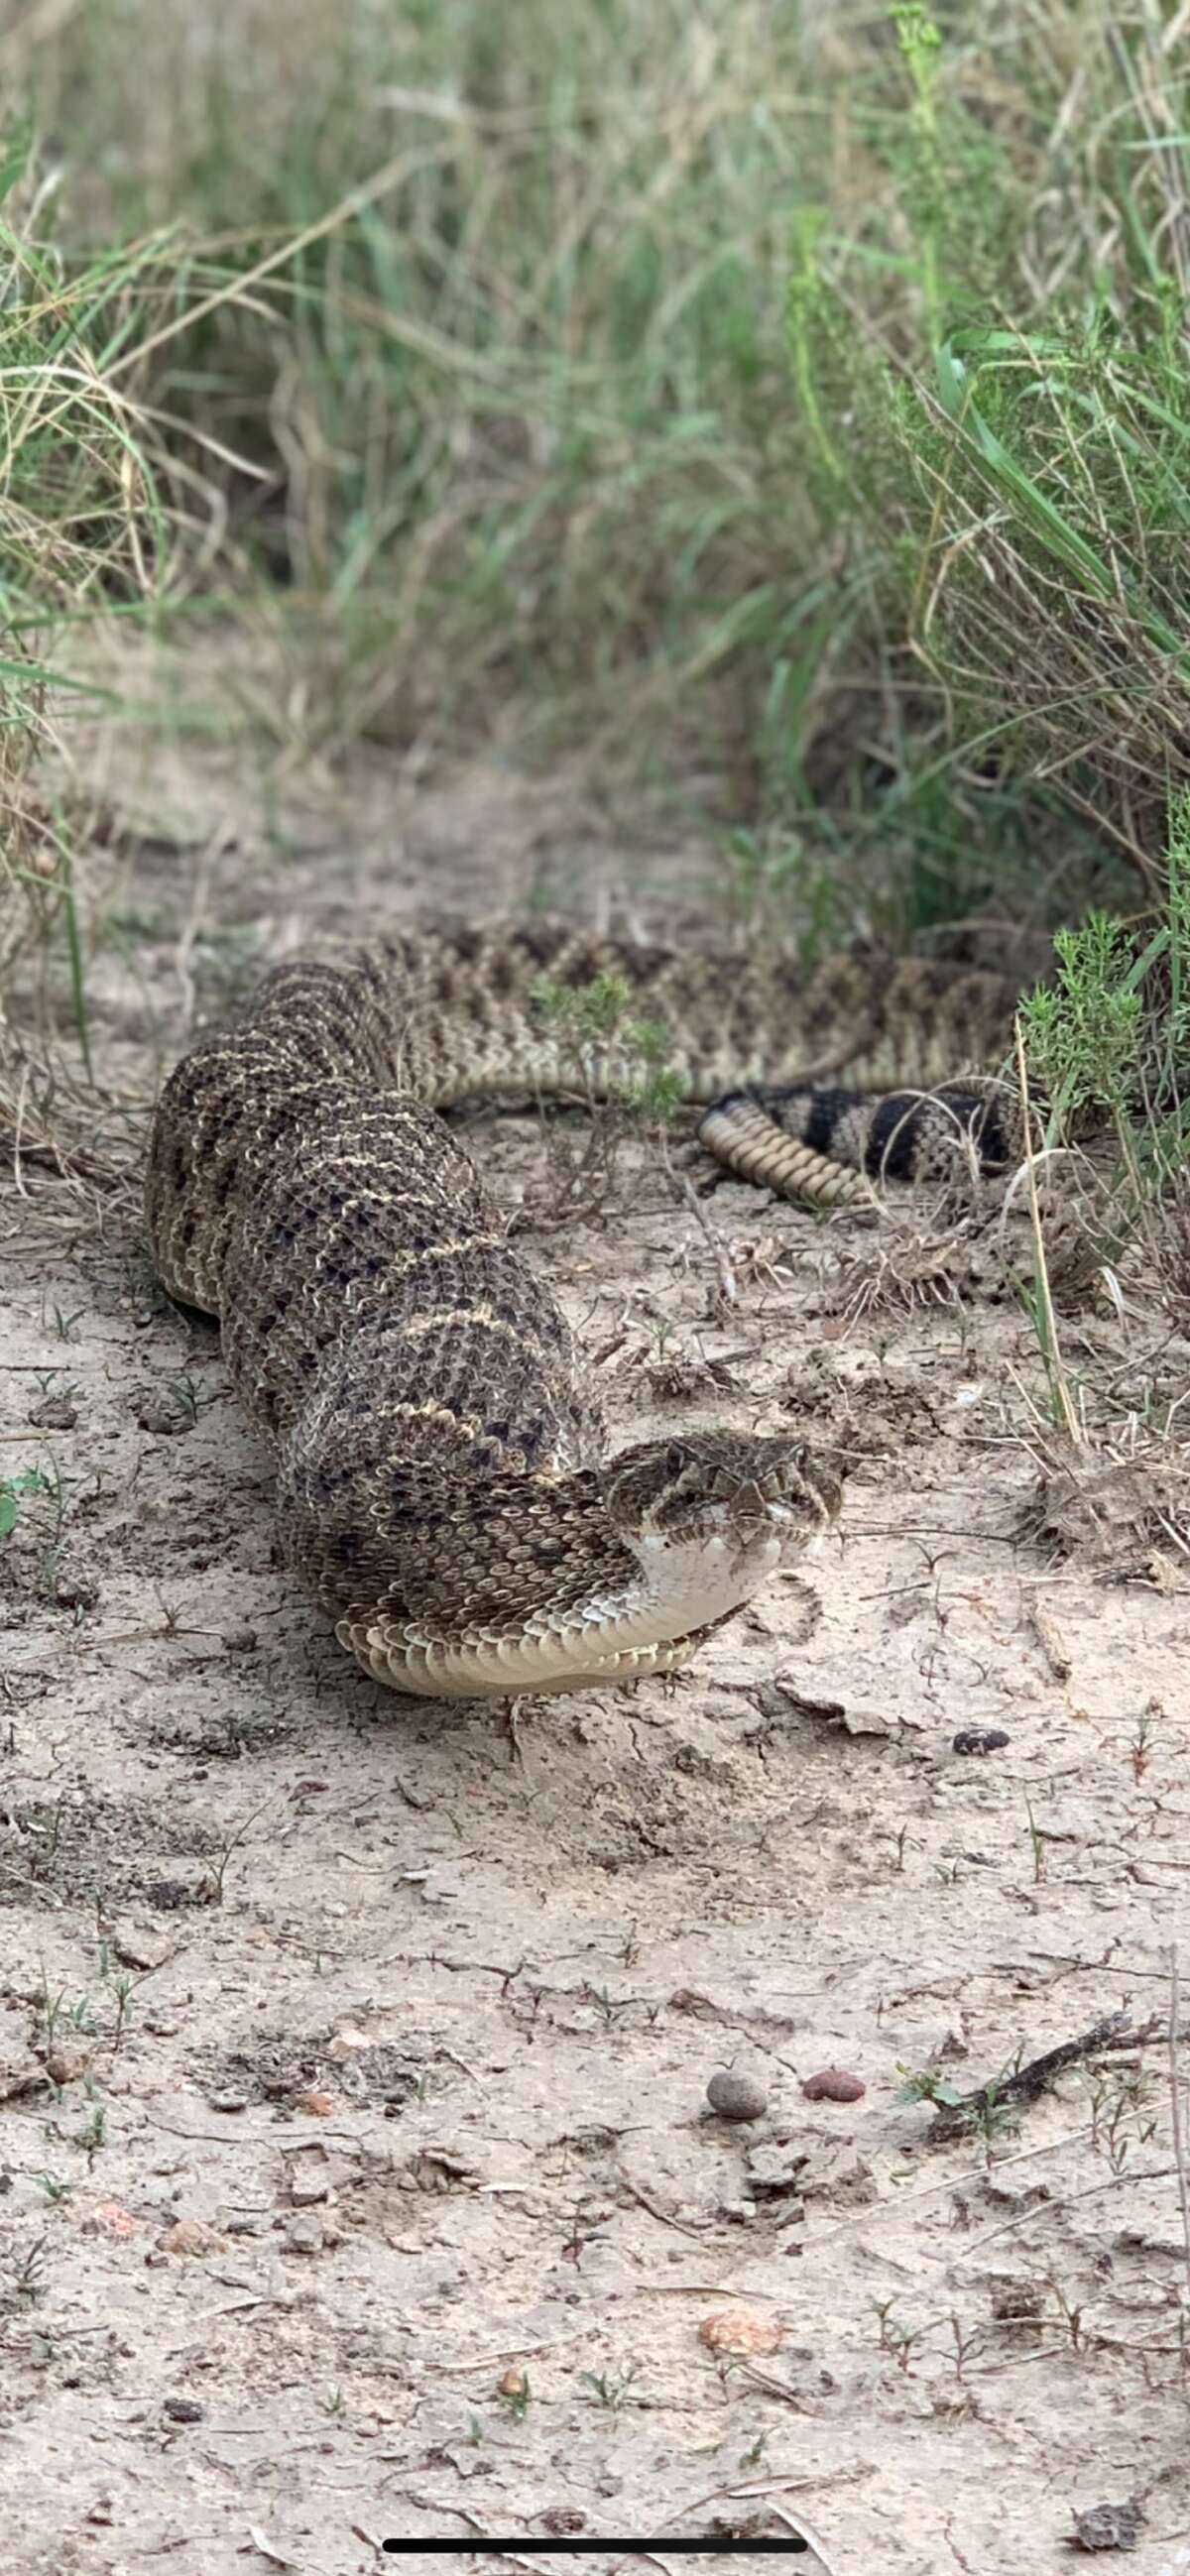 Brandon Nichols from Eagle Pass took a video of a massive rattlesnake hunting a rabbit, describing it as "the coolest thing he's ever seen."